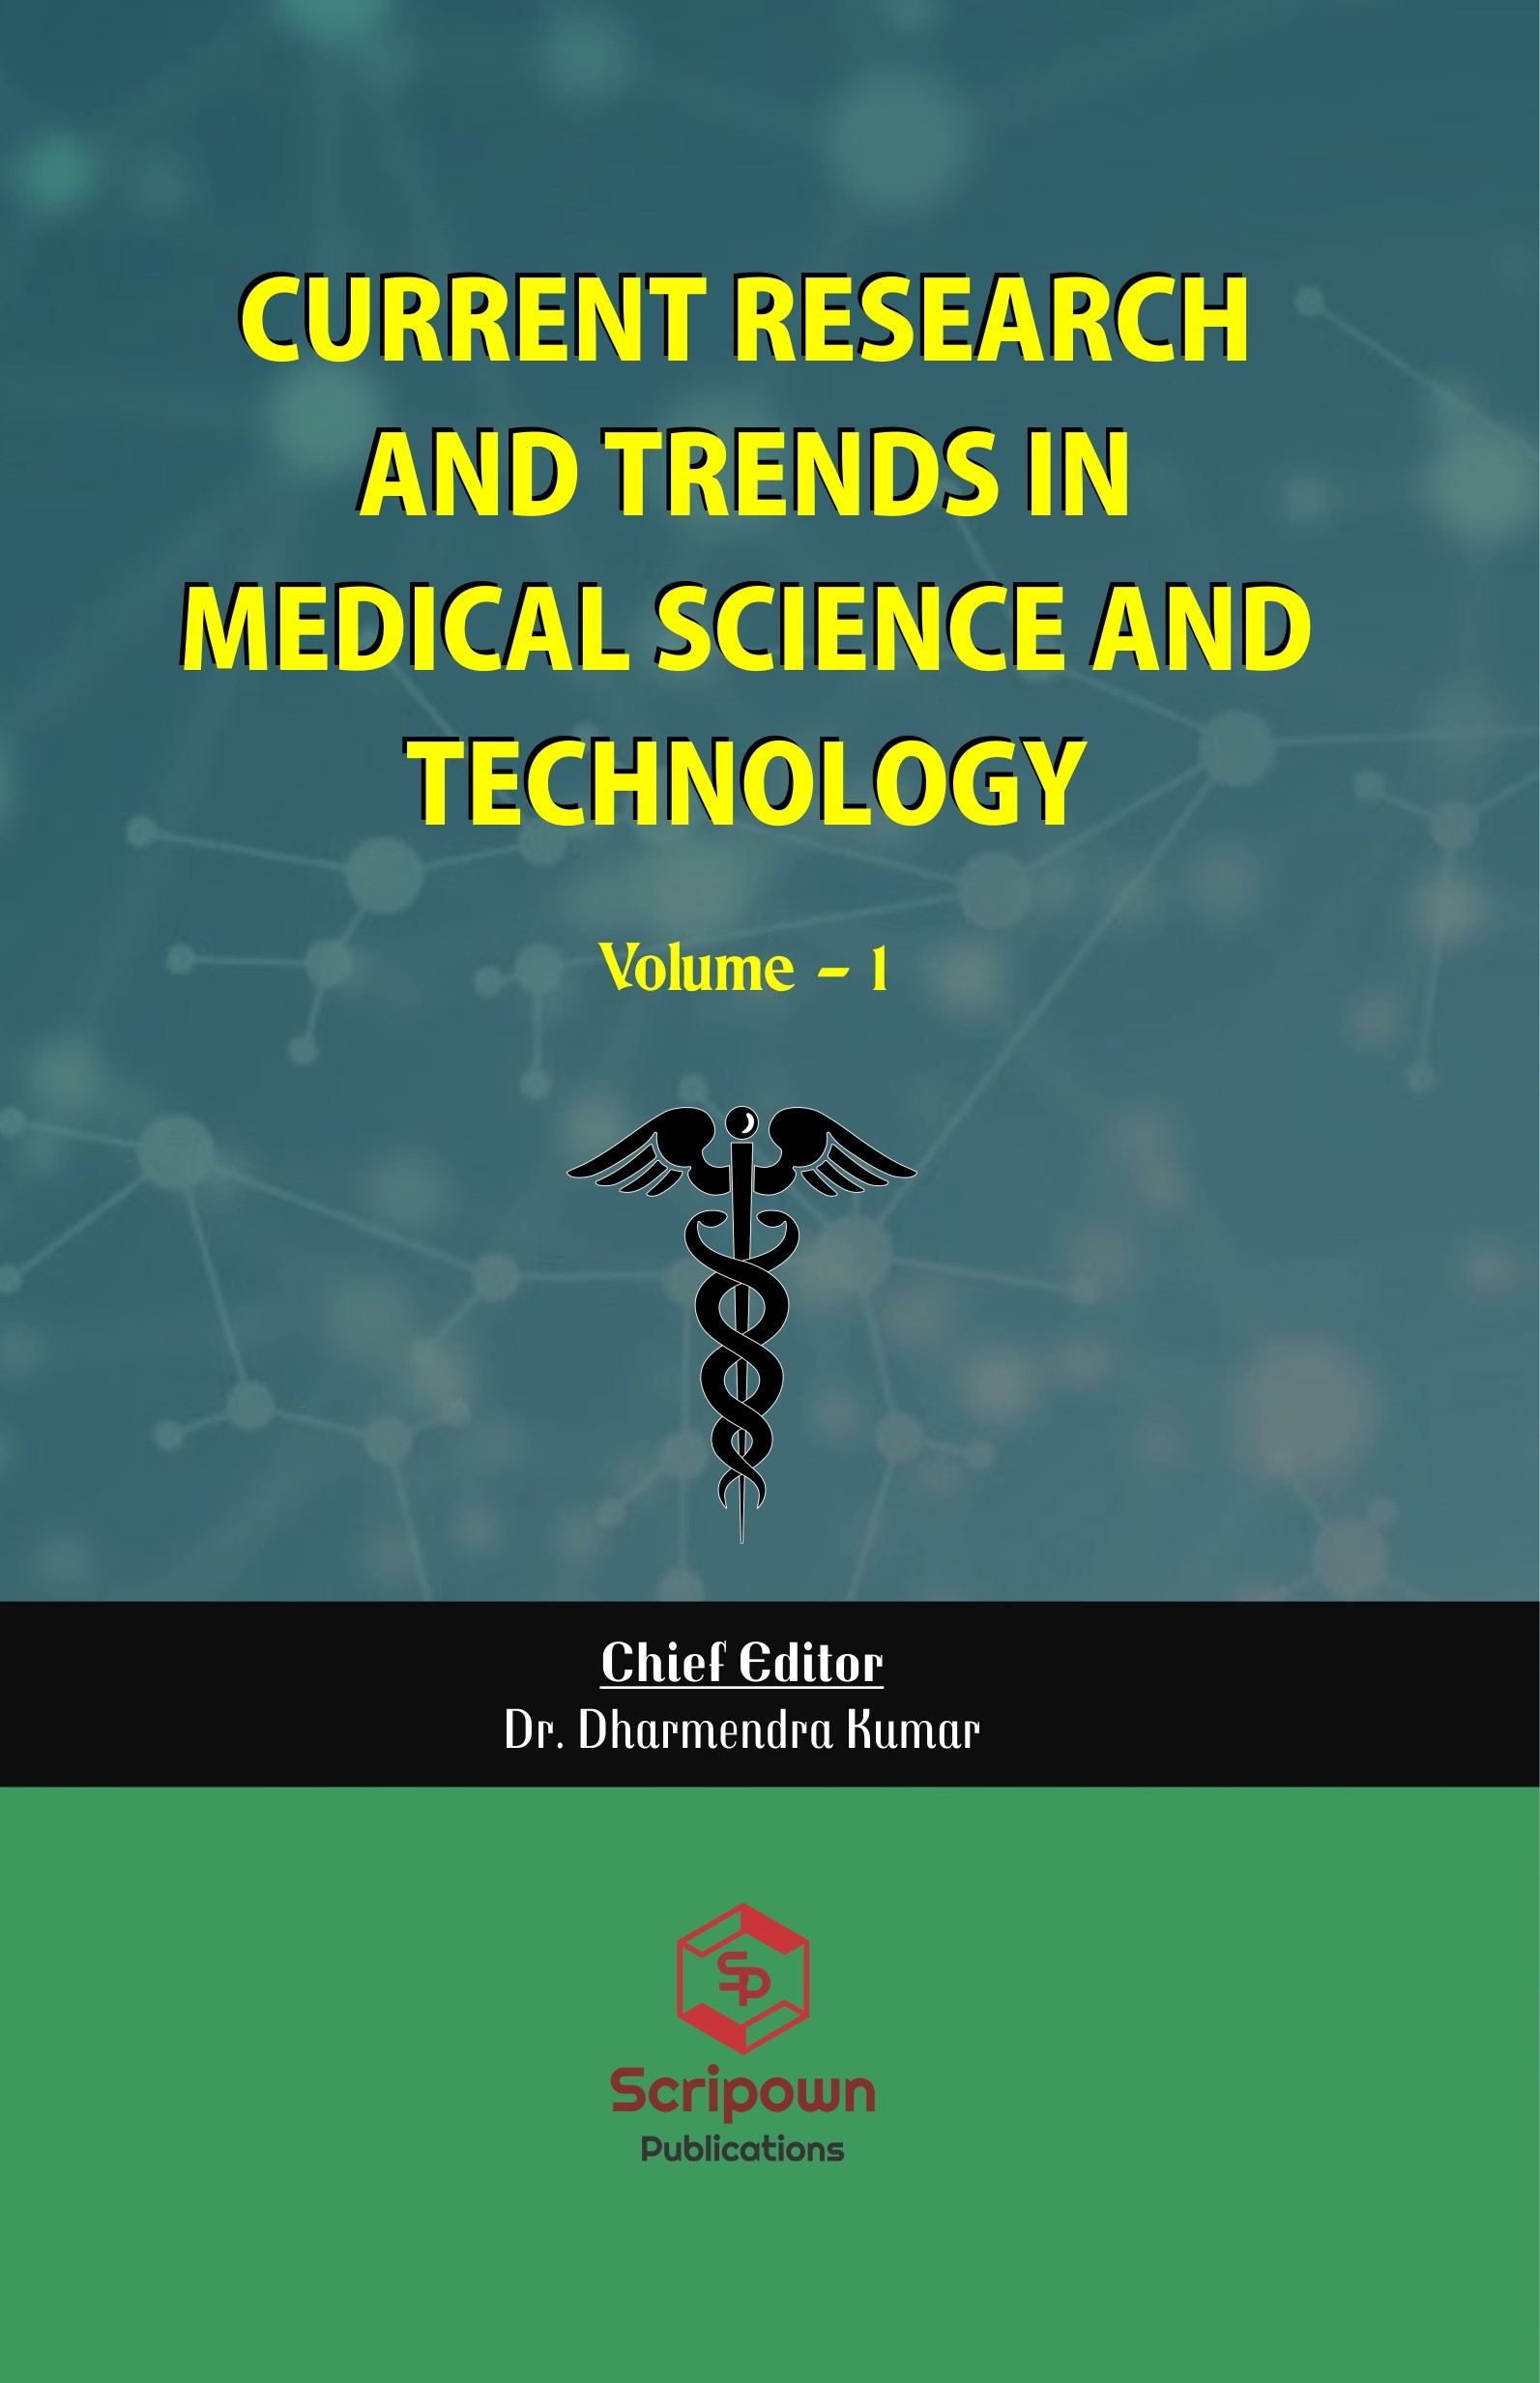 research topics about medical technology